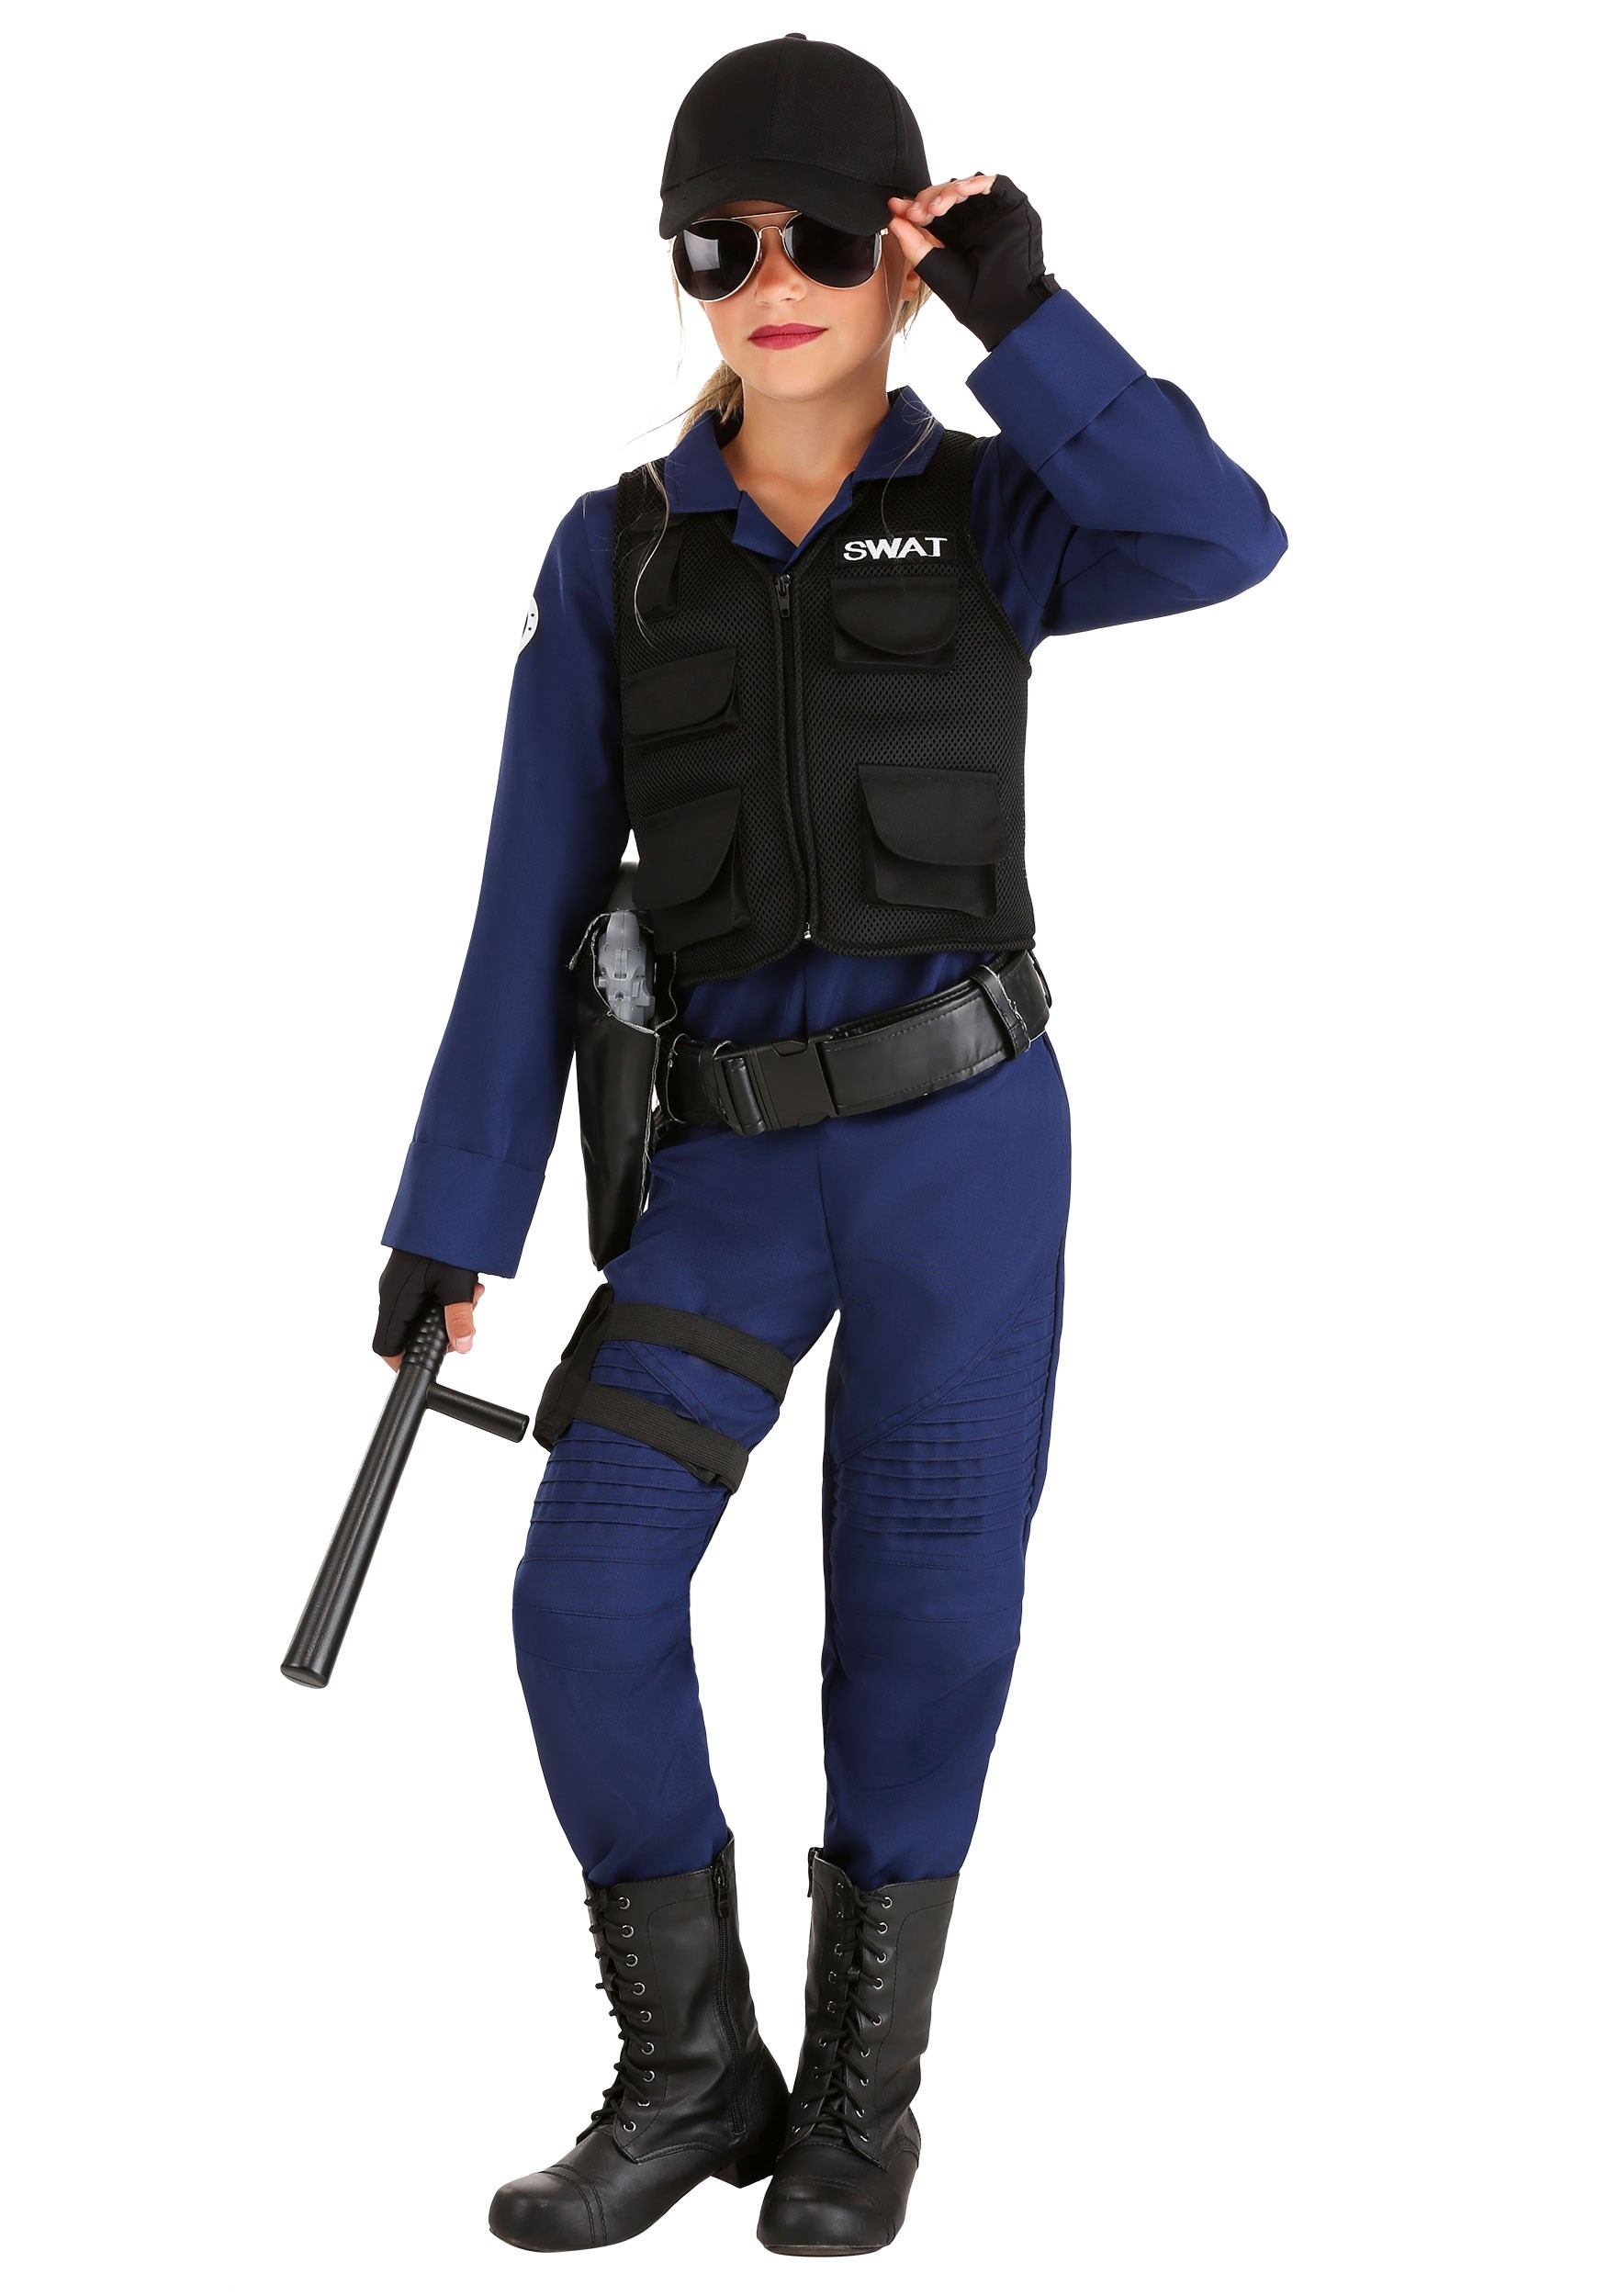 Dress Up America Swat Costume for Kids - Police SWAT Costume for Boys and  Girls